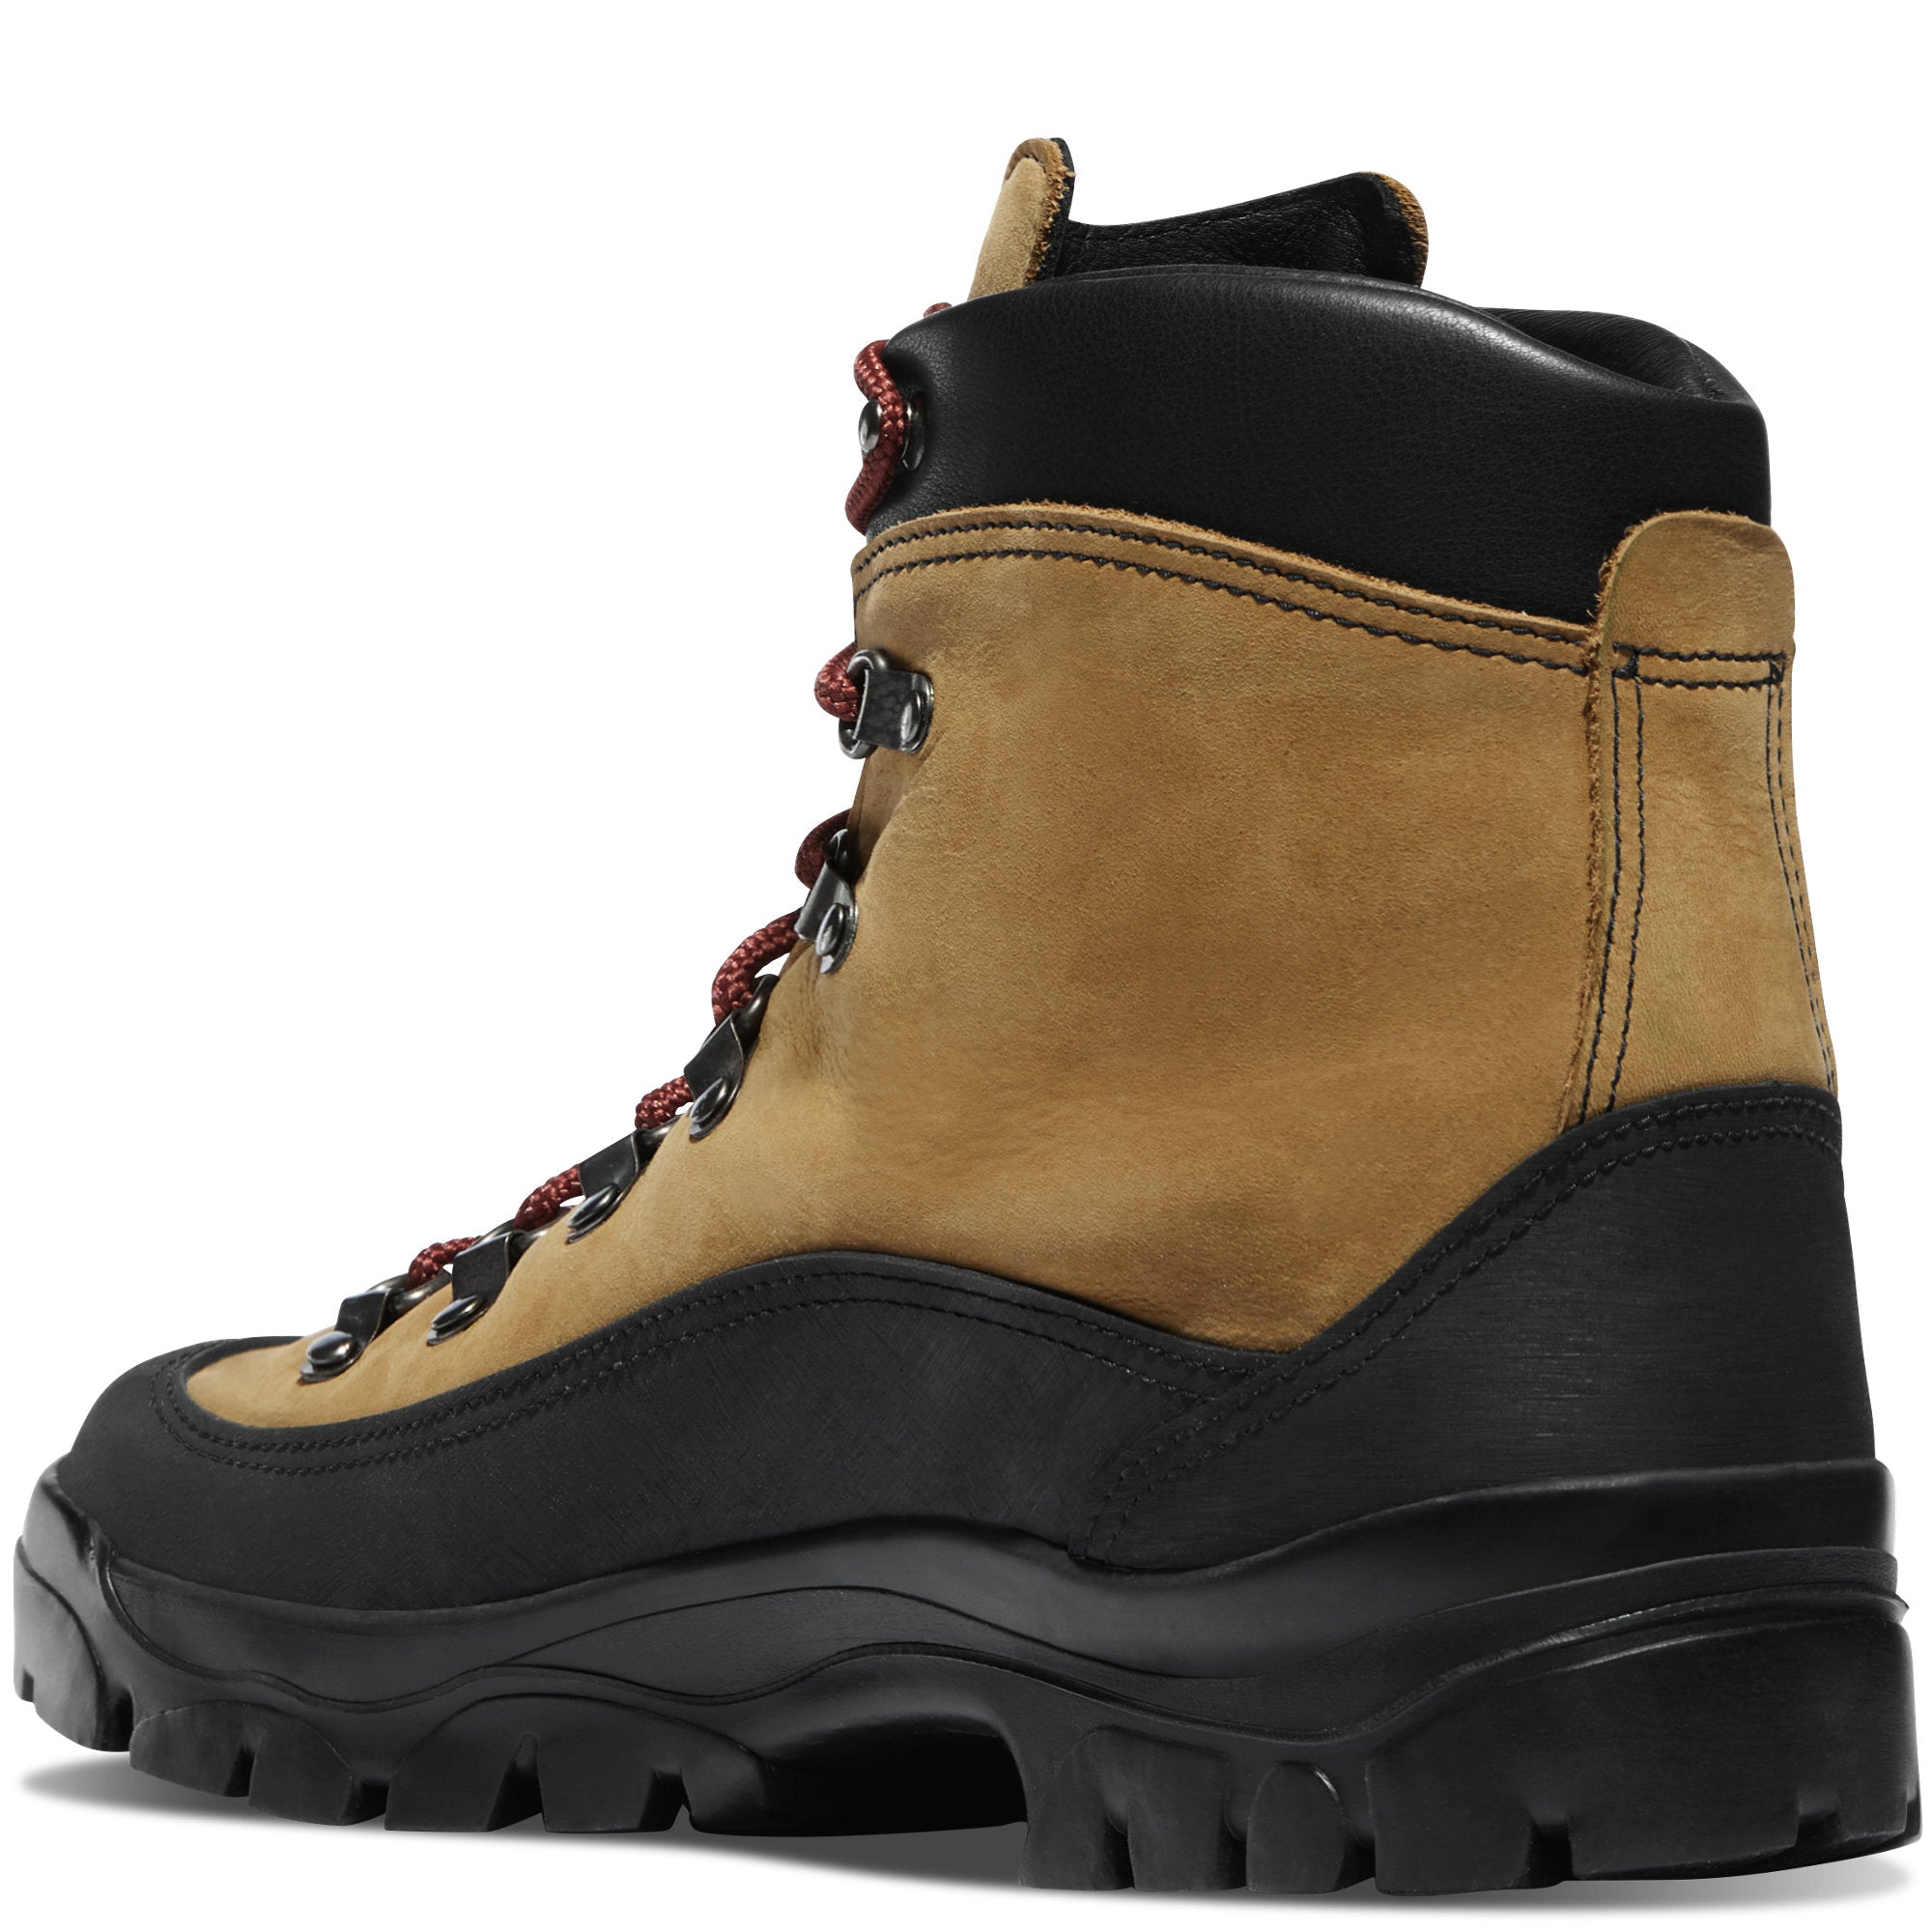 DANNER Crater Rim Boot – Western Tactical Uniform and Gear